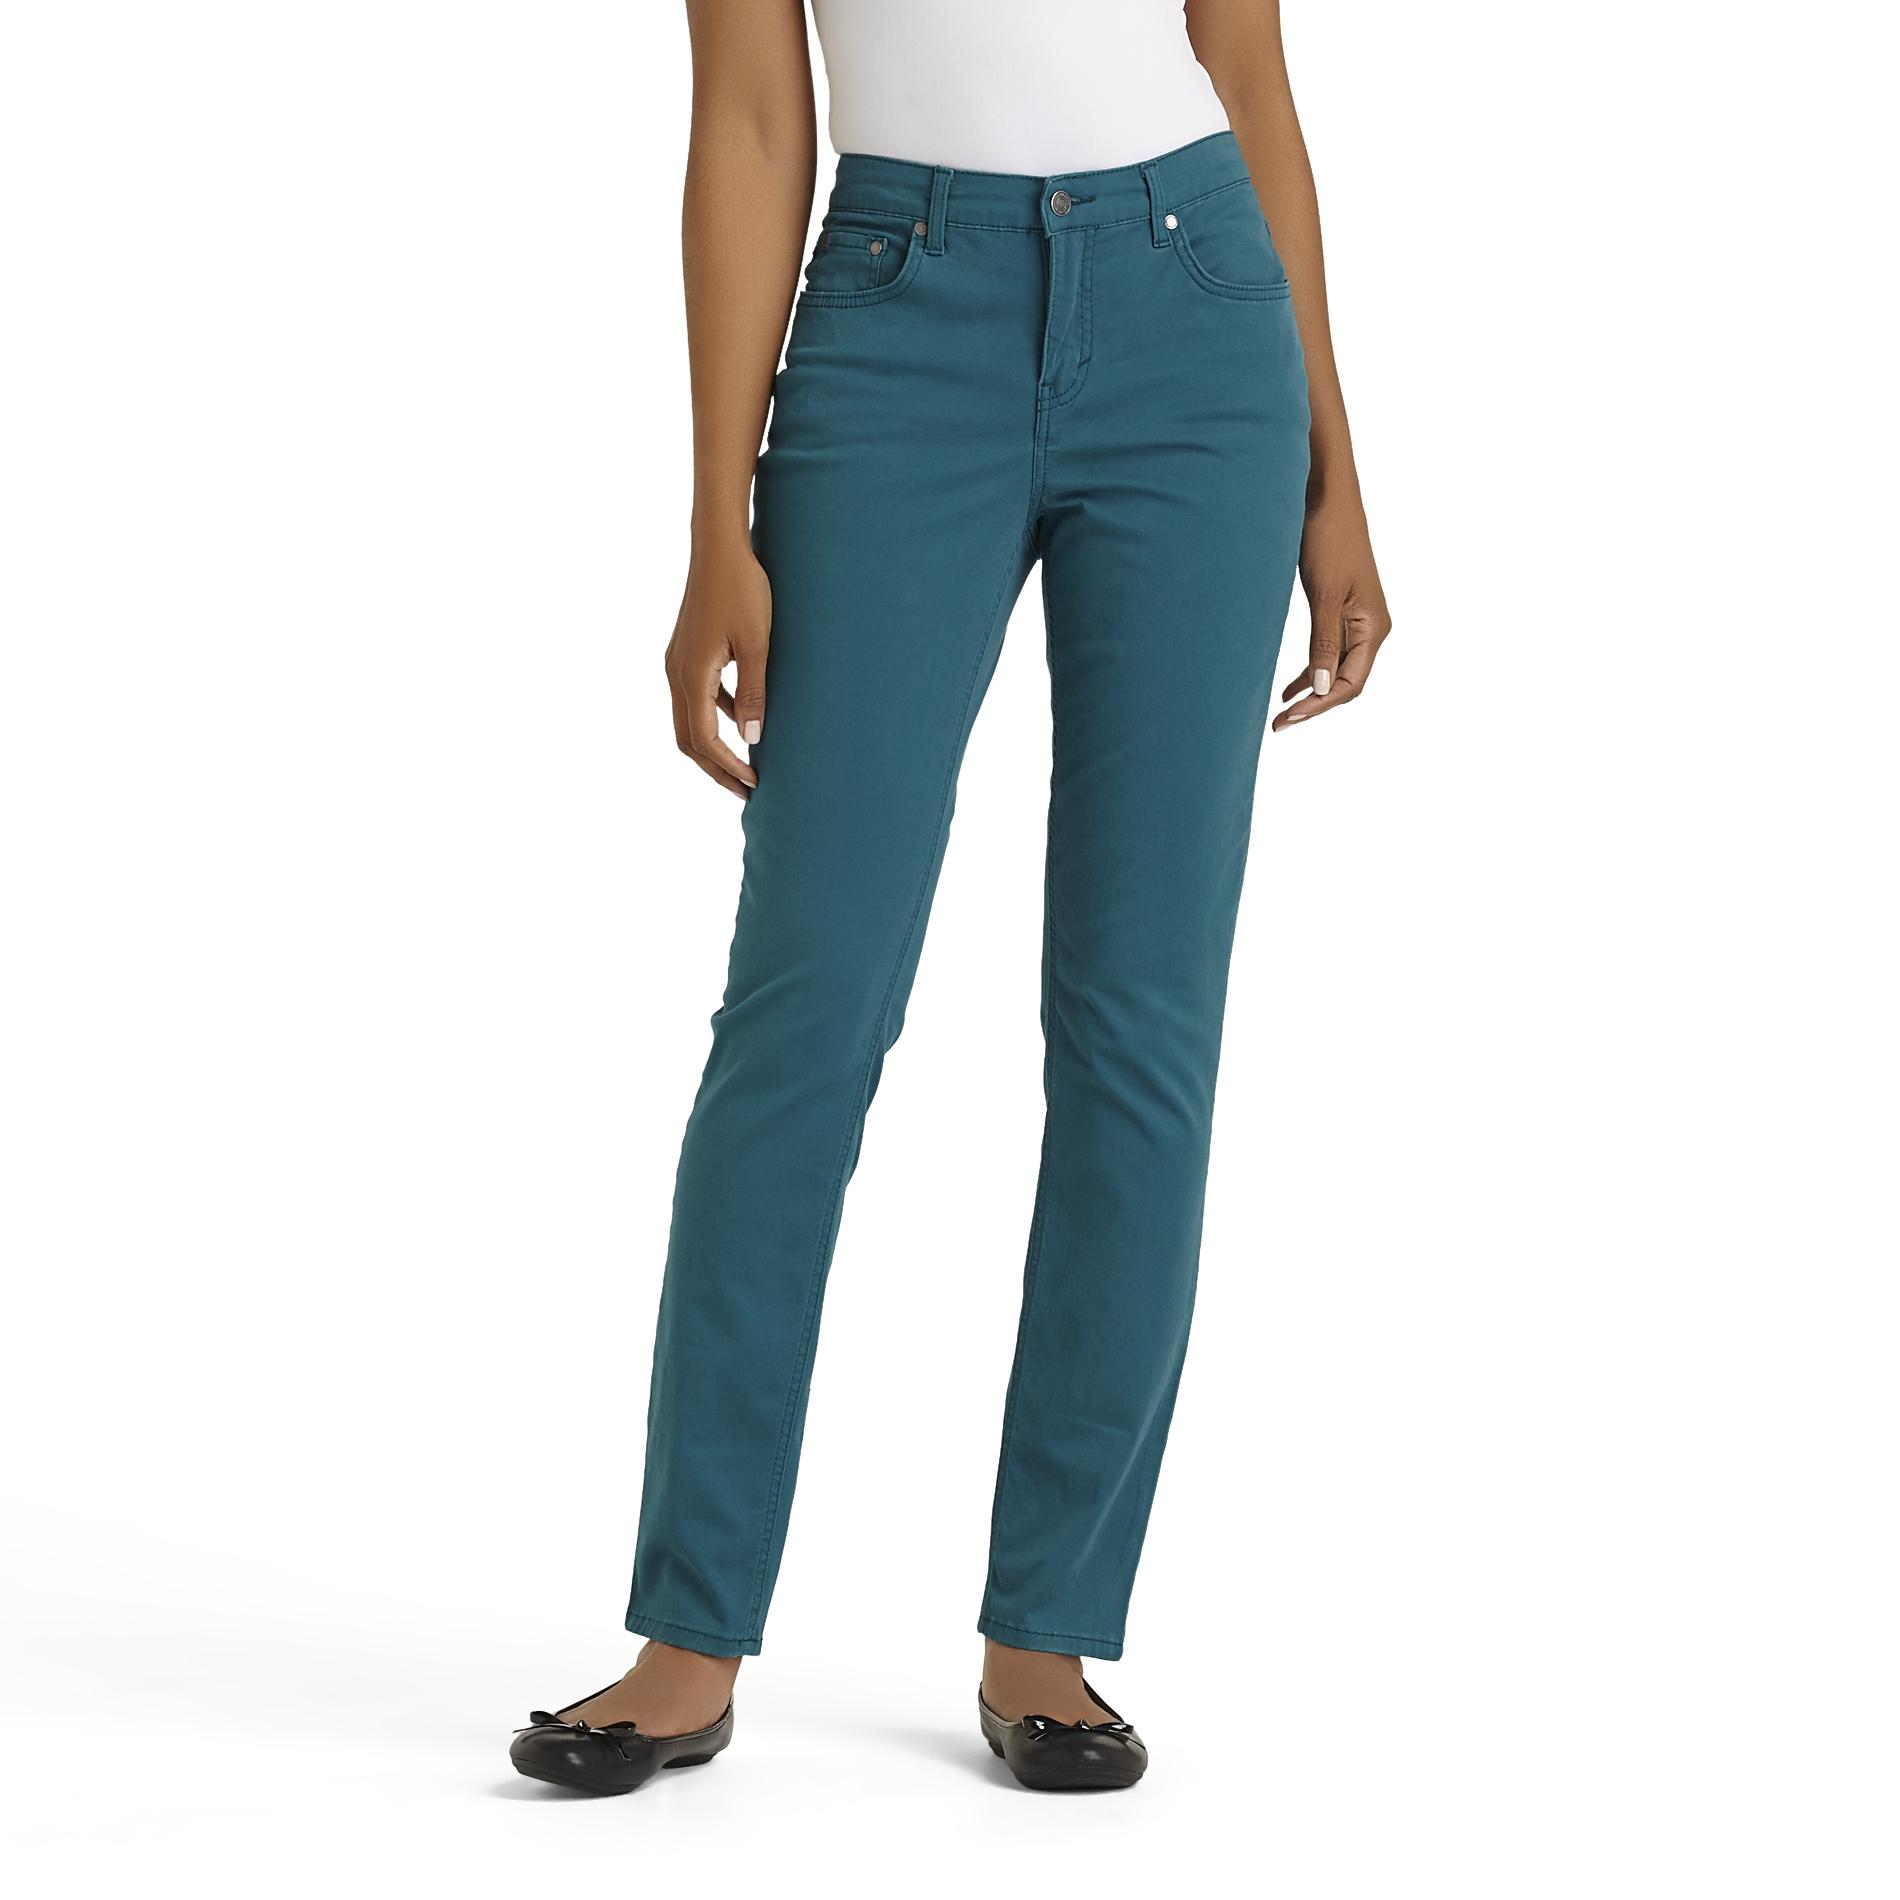 Jaclyn Smith Women's Slim Ankle Stretch Jeans - Clothing - Women's ...